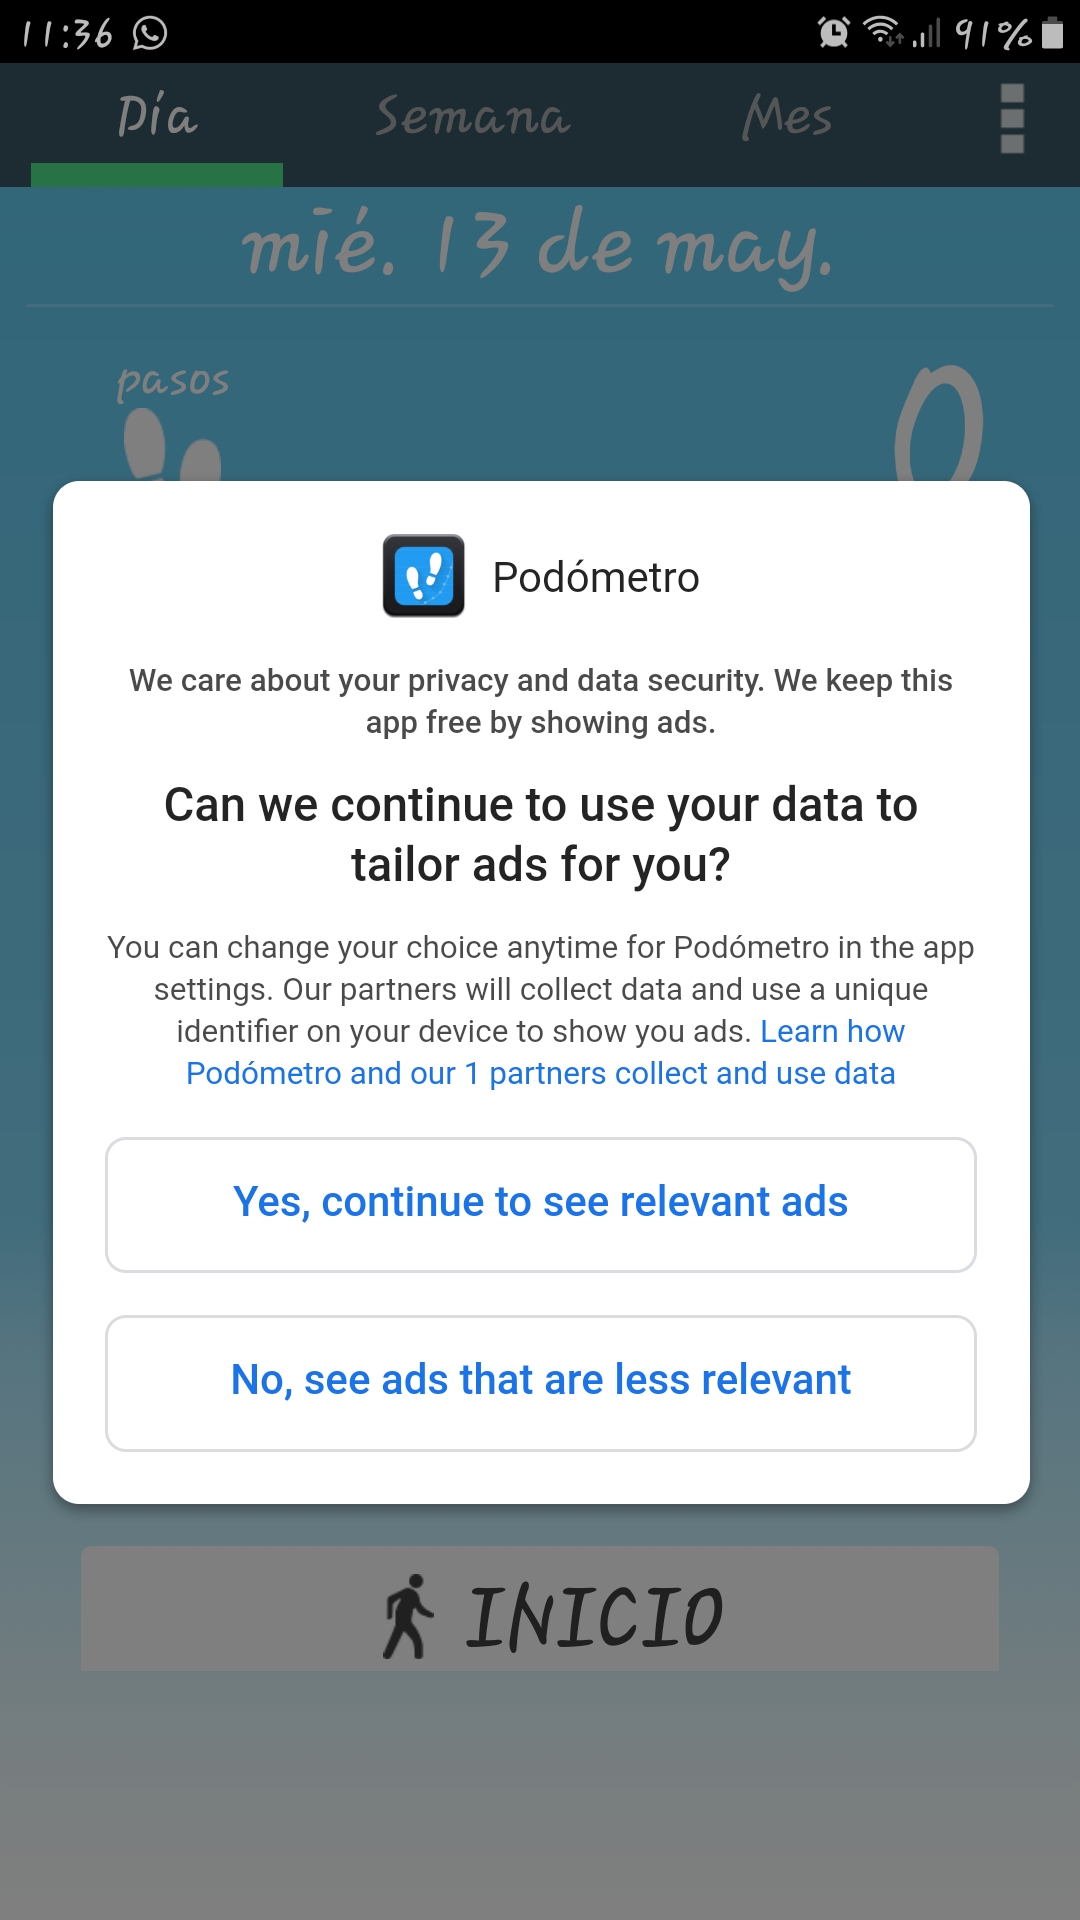 Permissions for personalized ads